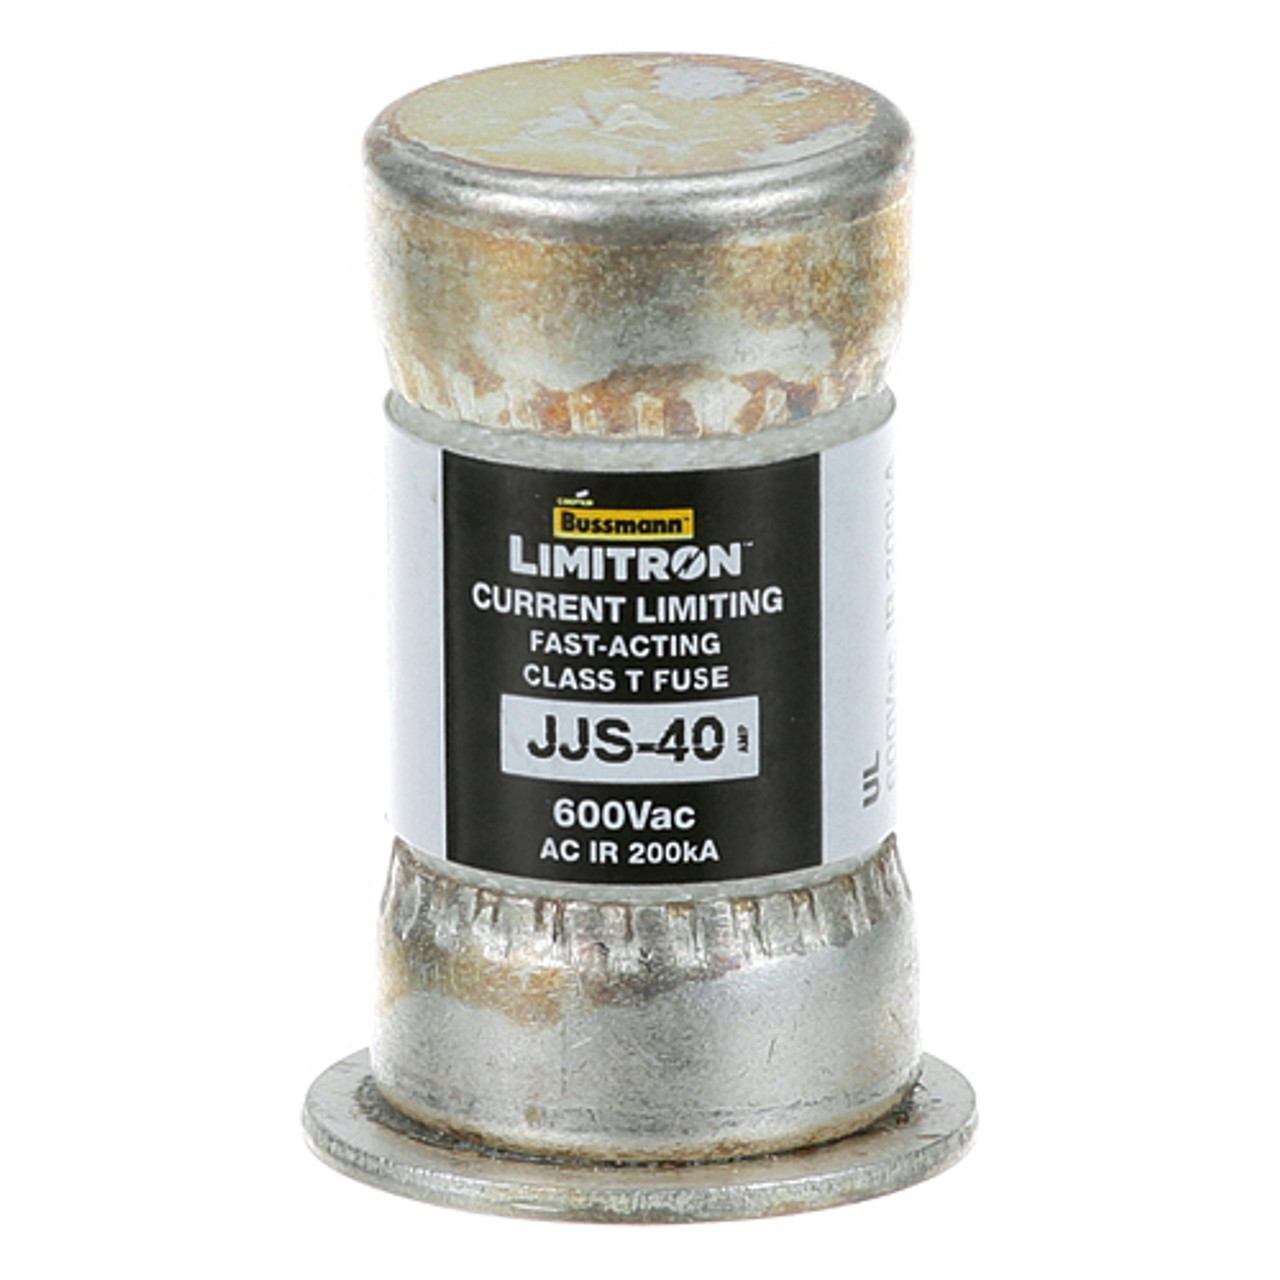 Fuse - Replacement Part For Merco 003844